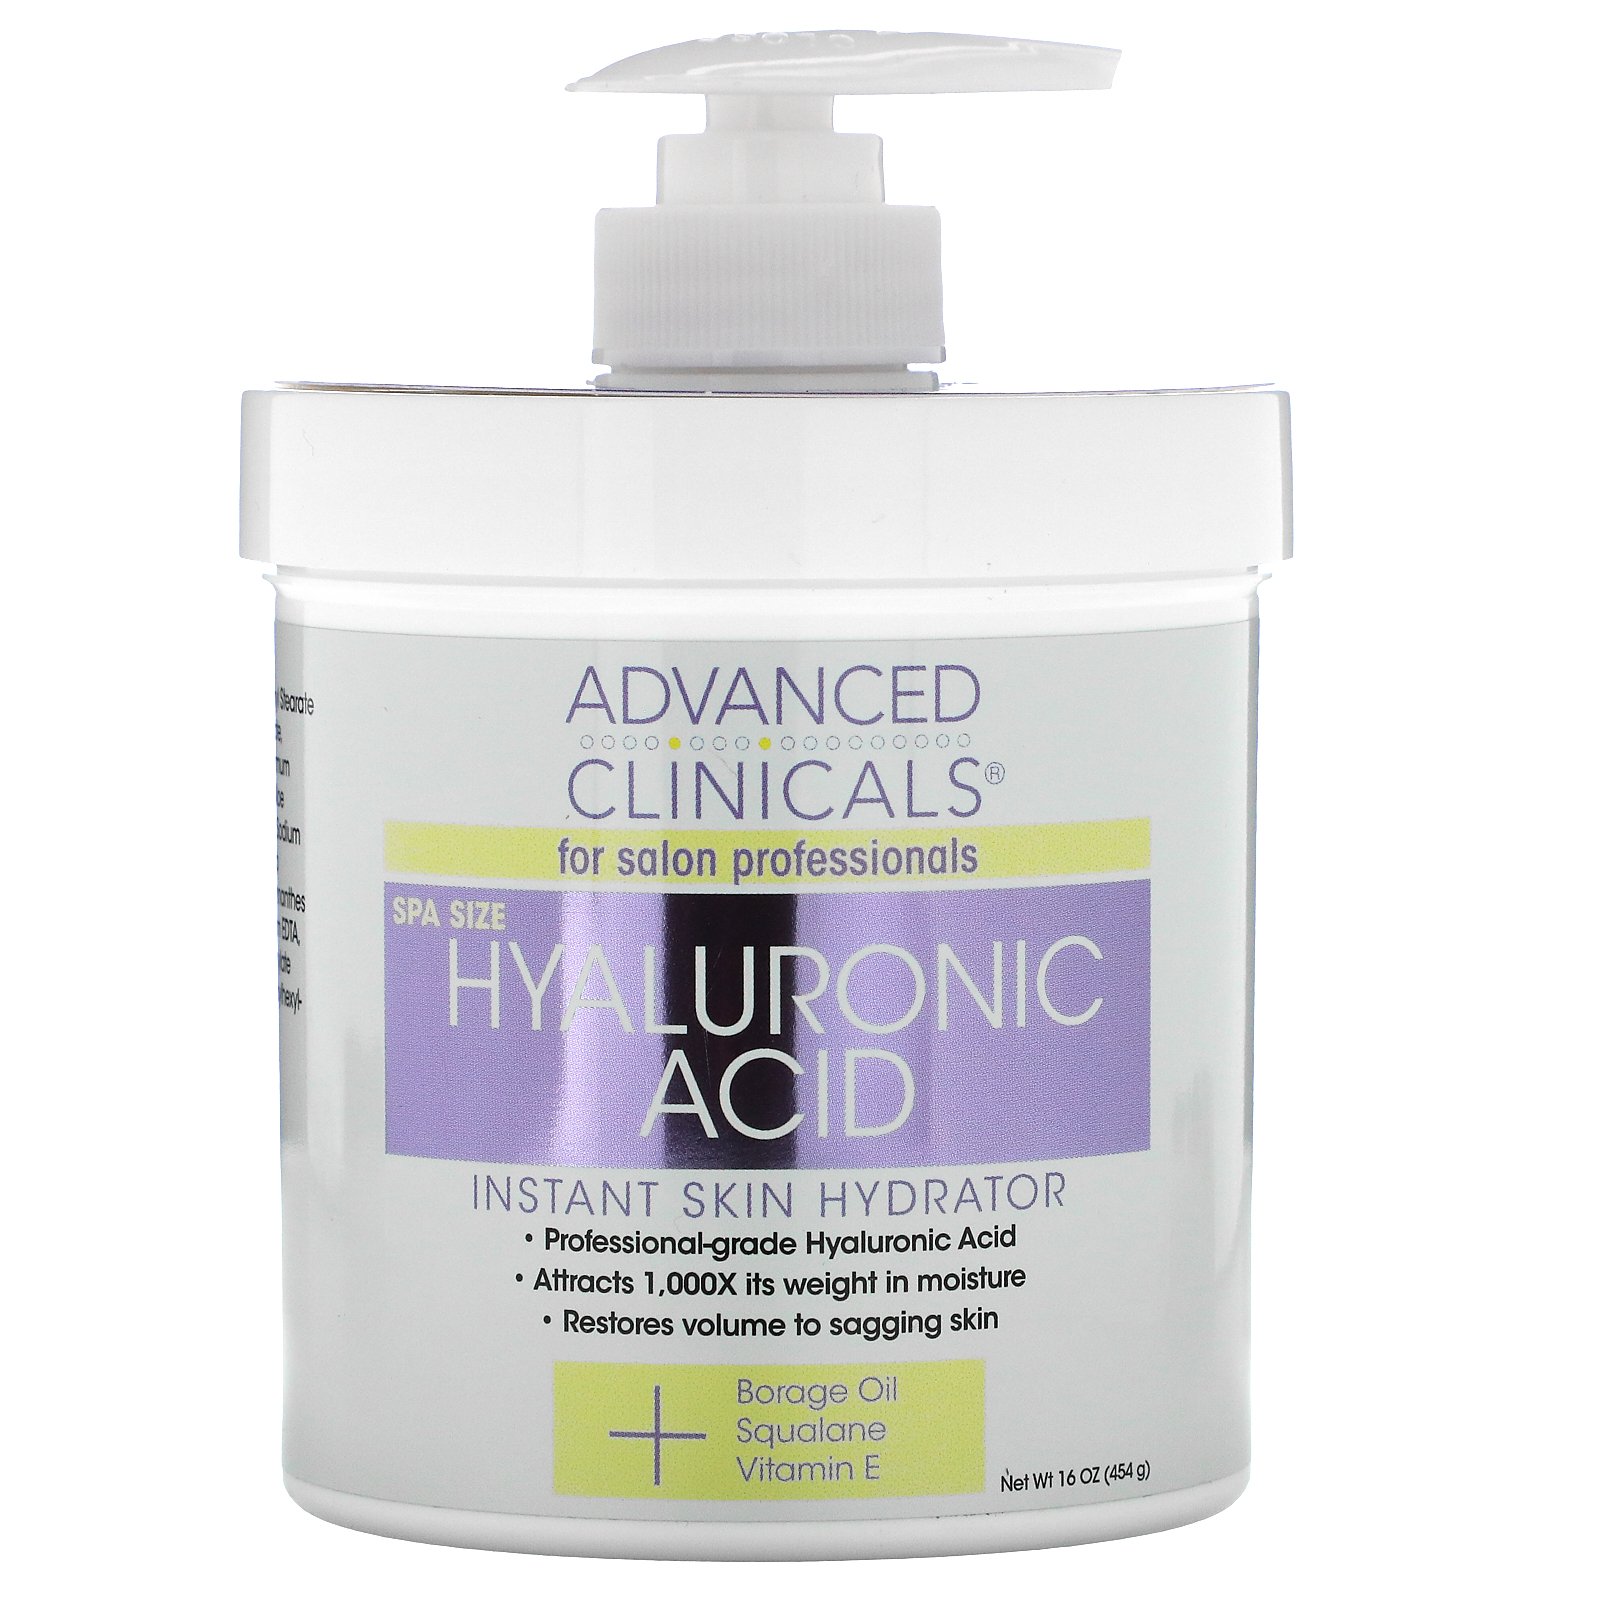 advanced clinicals anti aging hyaluronic acid cream)